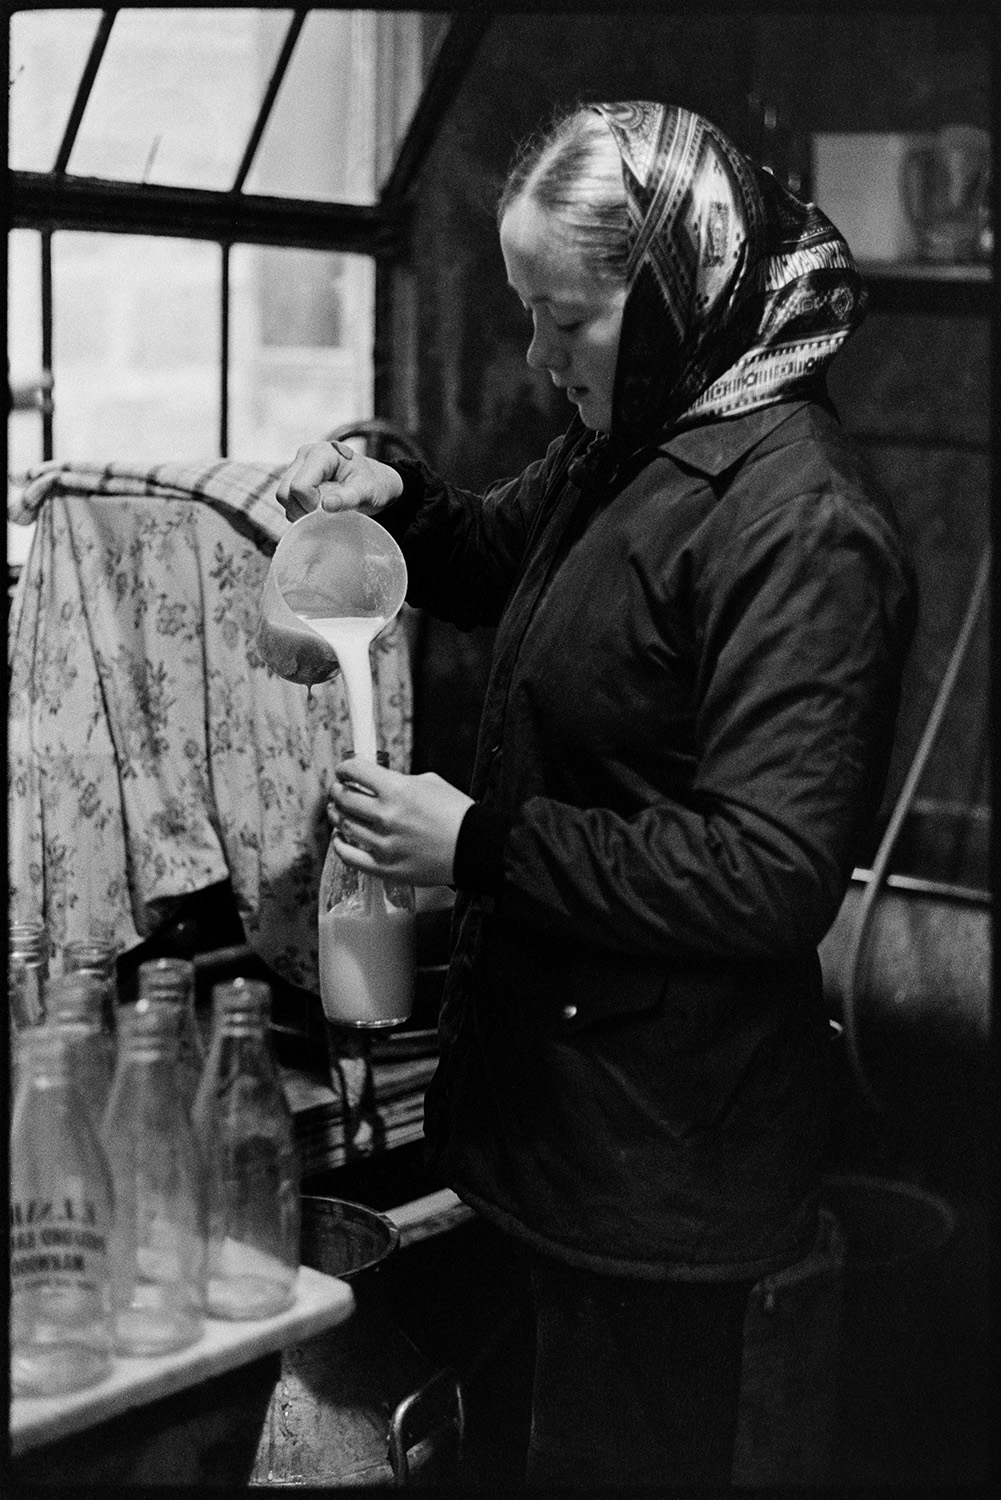 Woman filling milk bottles before doing milk round. 
[Susan Woolacott filling milk bottles with milk in the farmhouse at Verdun, Atherington, before delivering them on her milk round. She is wearing a head scarf.]